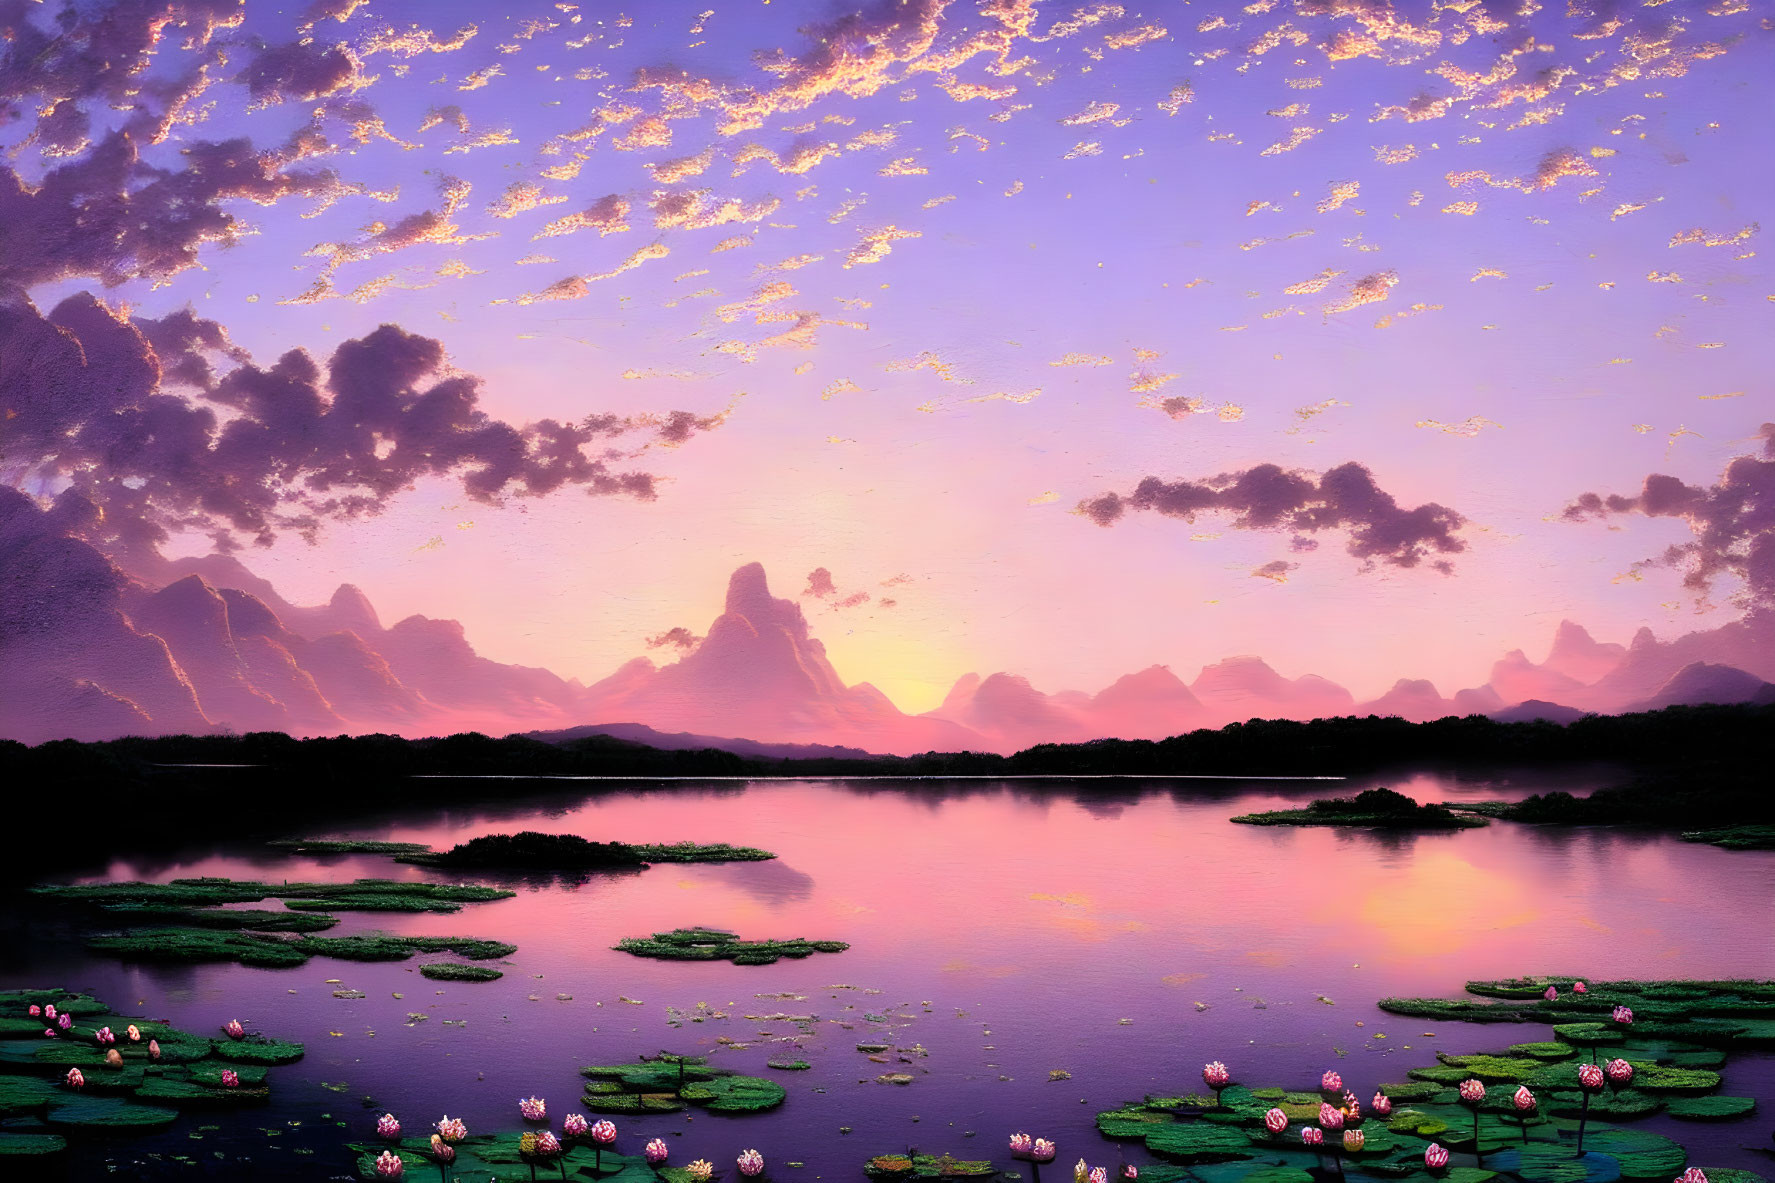 Tranquil sunset scene: lake, water lilies, pink and purple hues, clouds, mountains